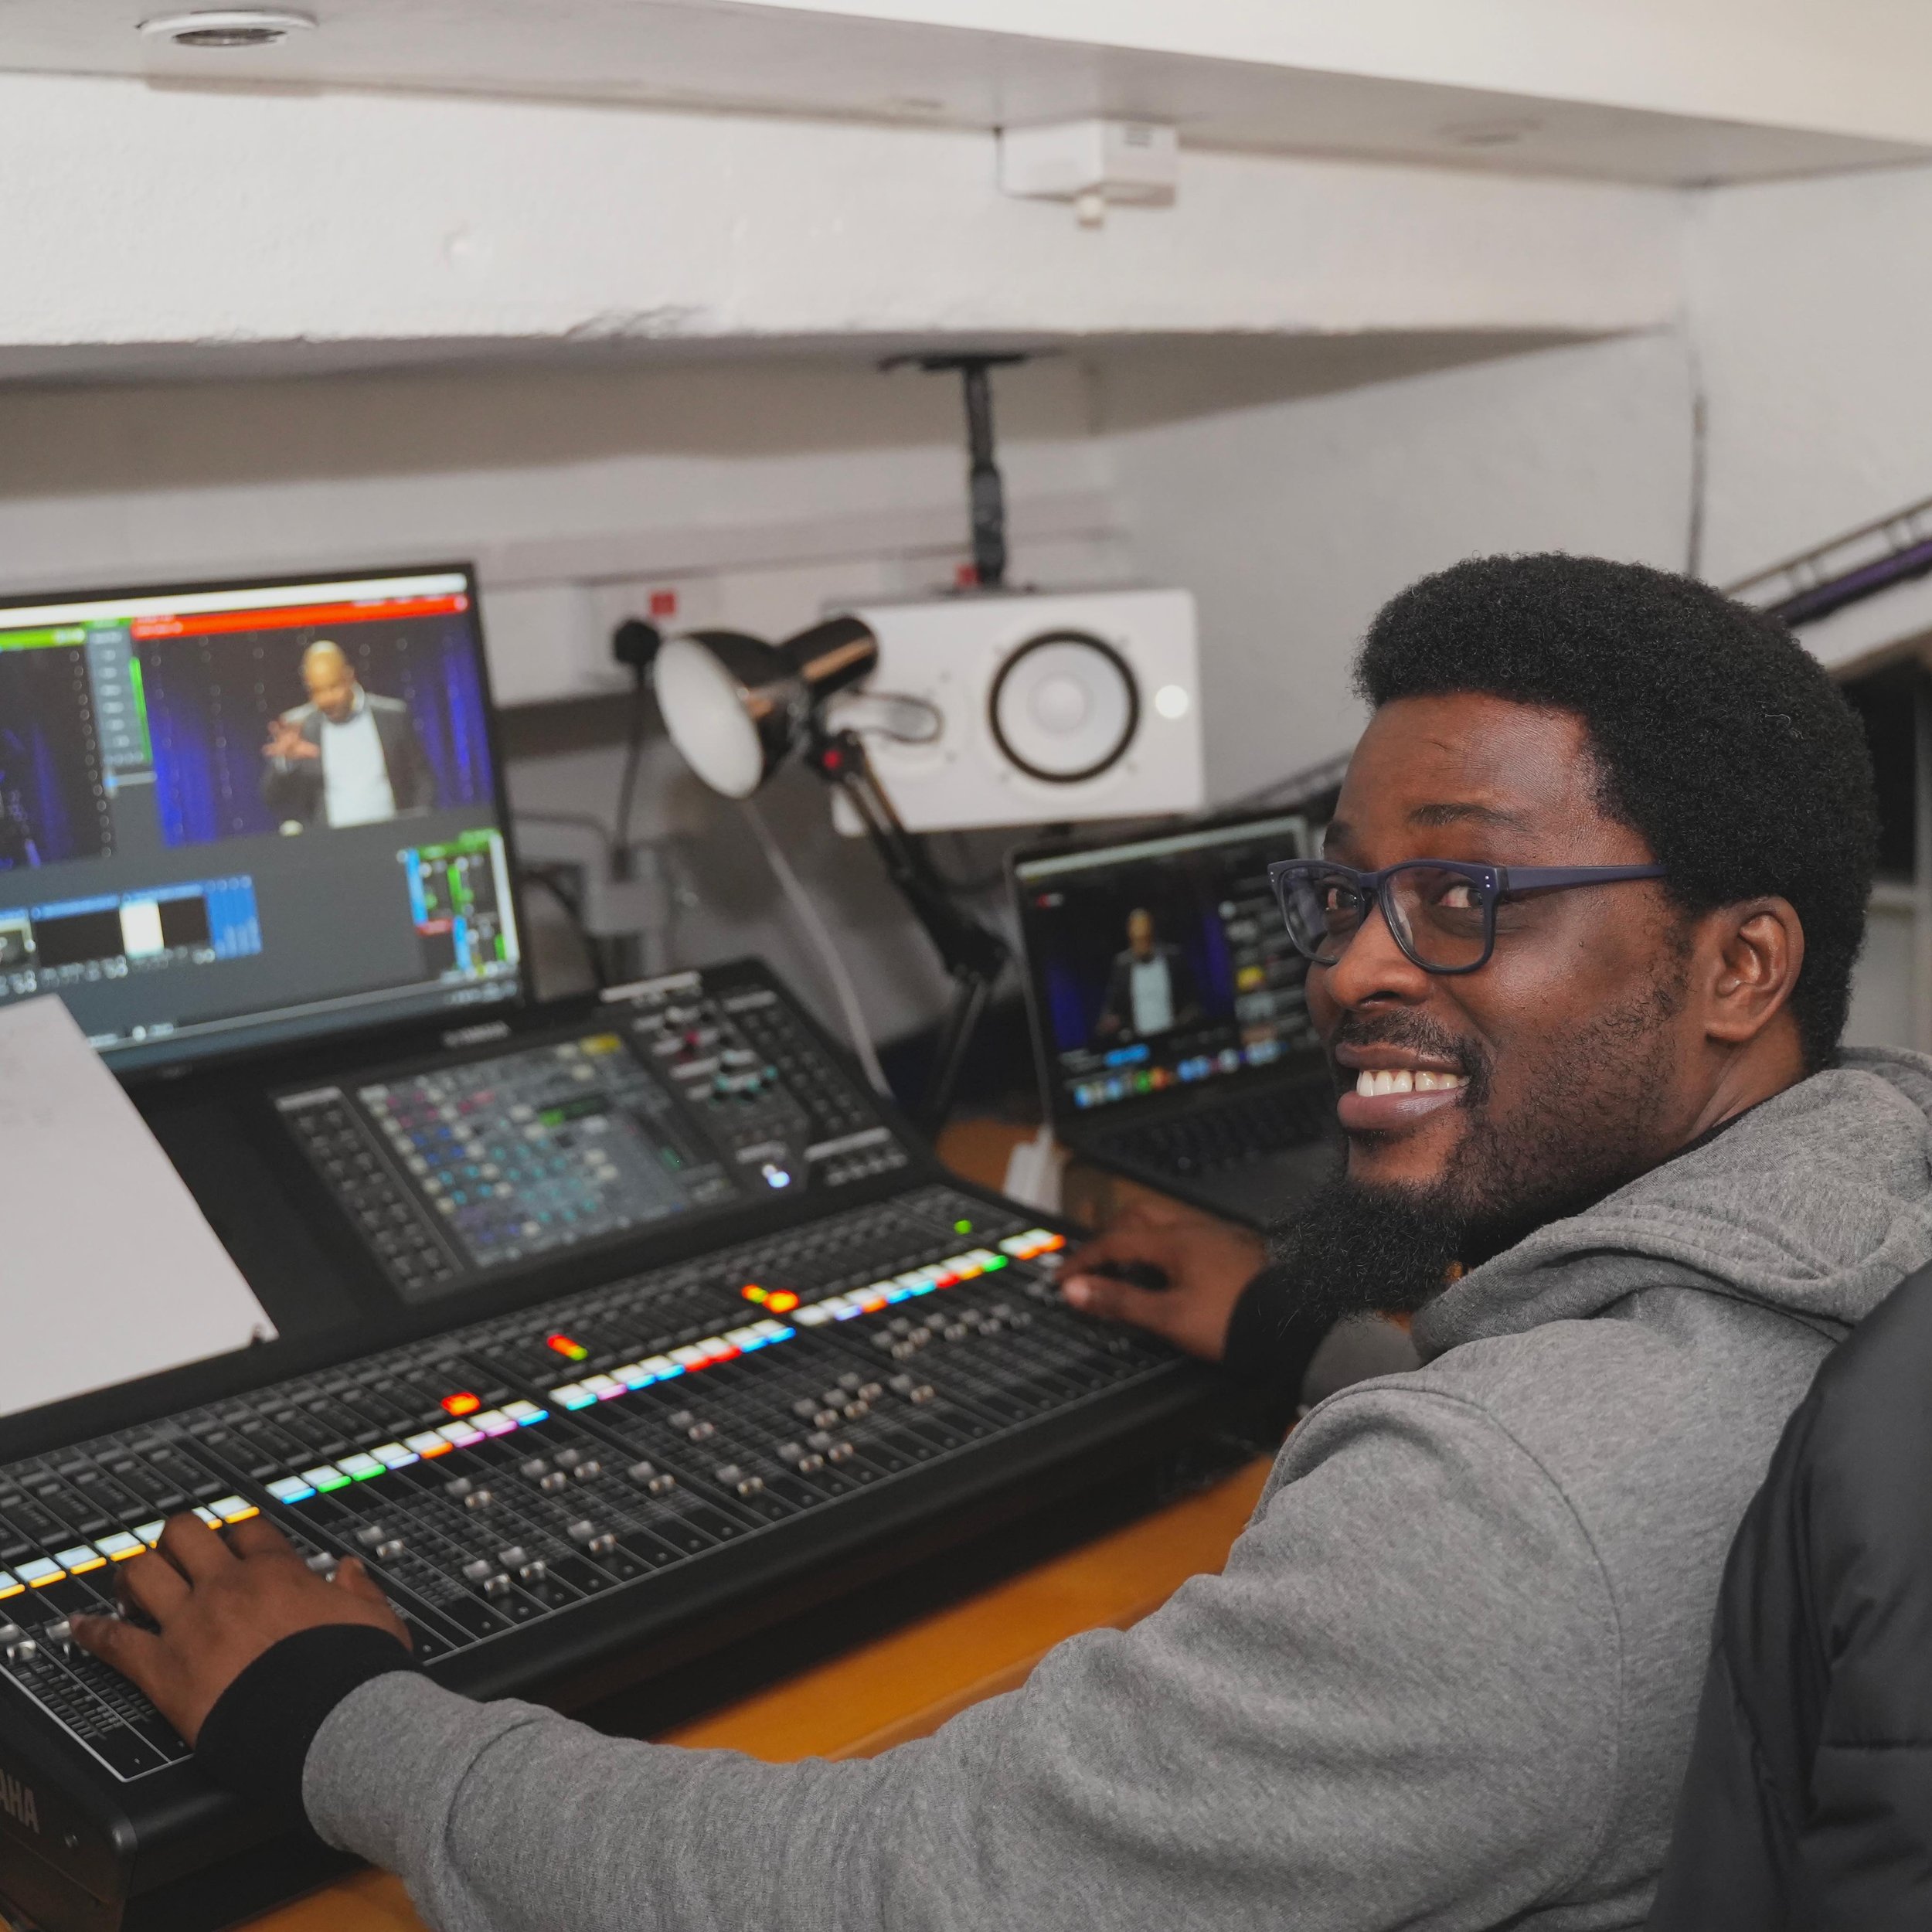 We are so grateful for our amazing Production Team - they make sure sound, graphics, lighting, cameras, and livestream are all running to make our services accessible to everyone in the building and watching online! Interested in serving? Training pr